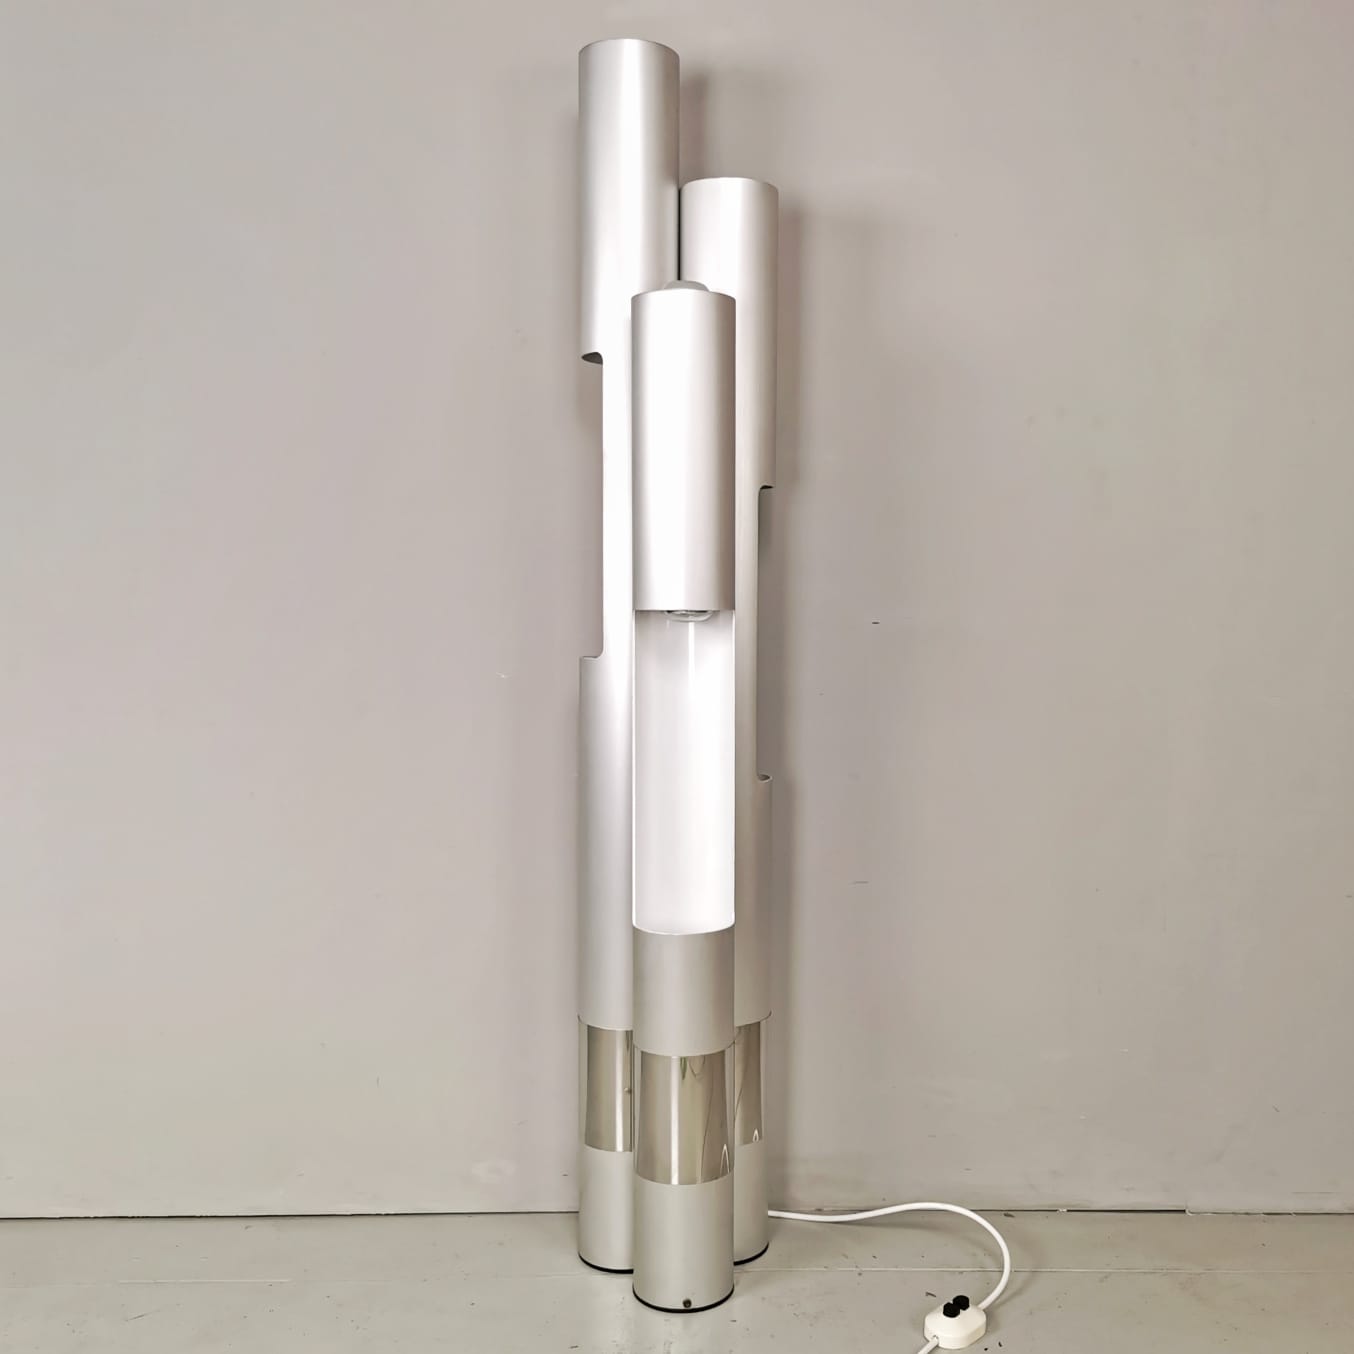 Space Age tubular lamp from the 70s